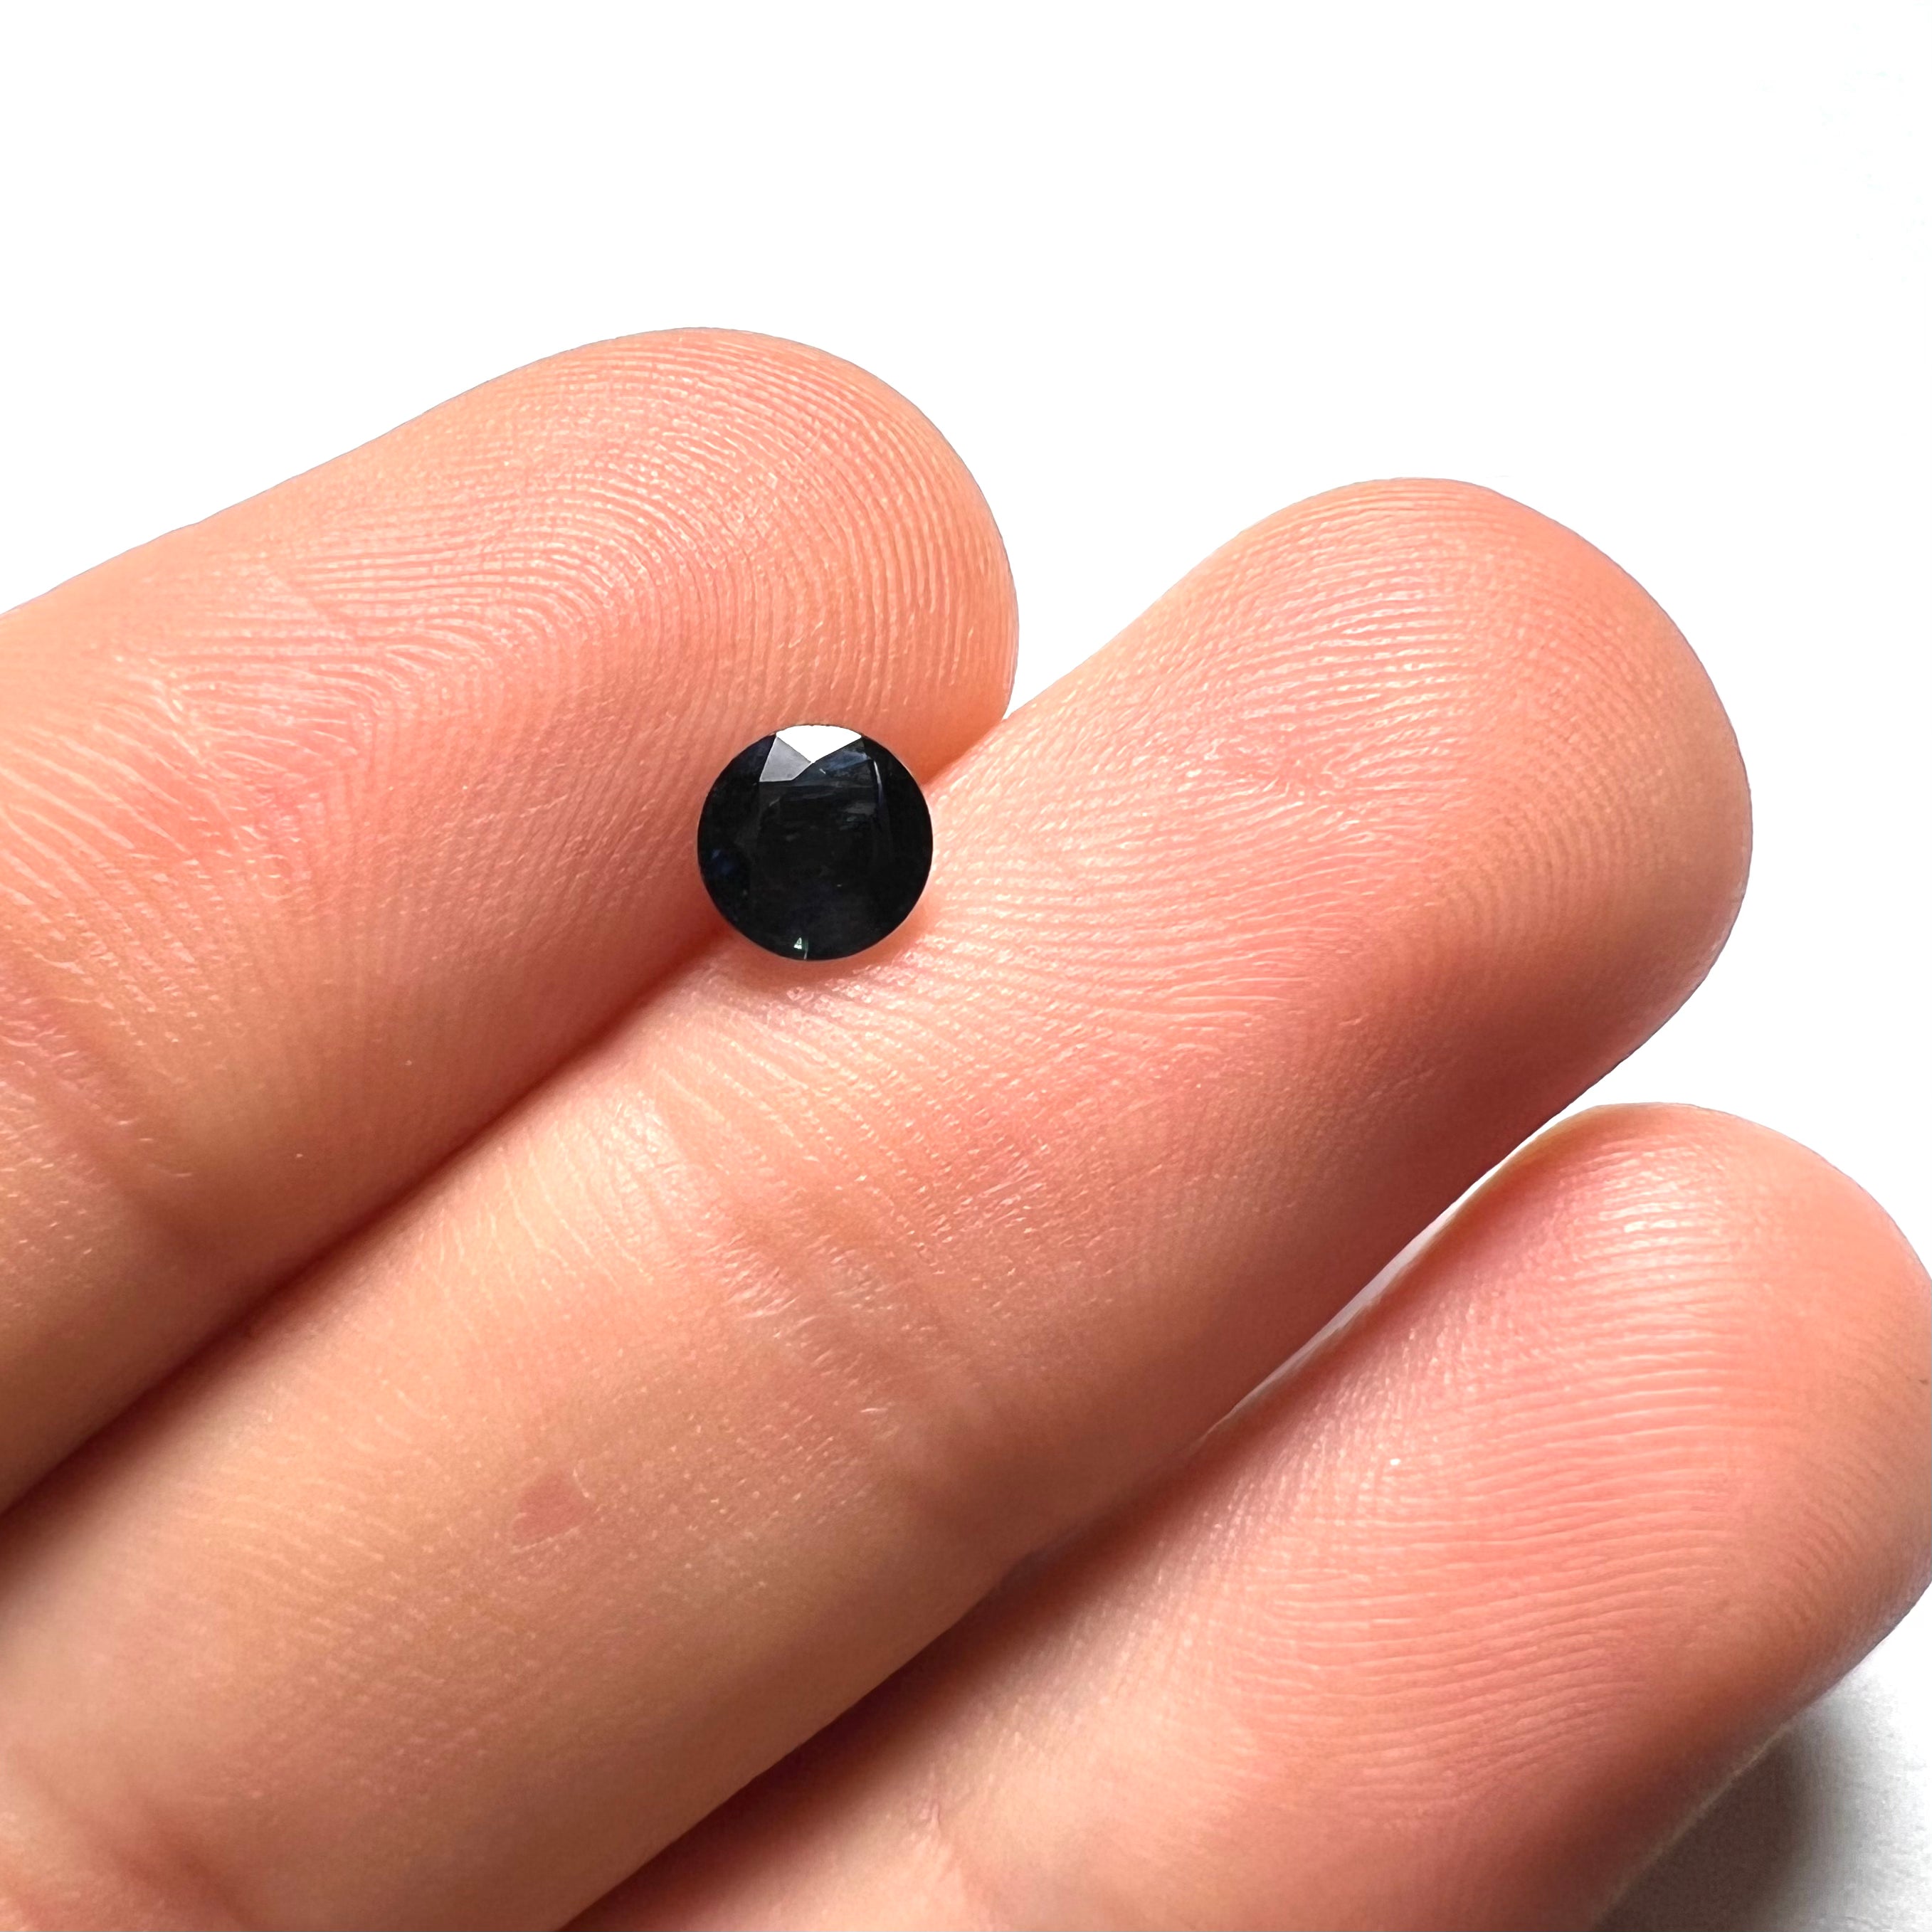 .78CT Loose Round Blue Sapphire 5.x4mm Earth mined Gemstone